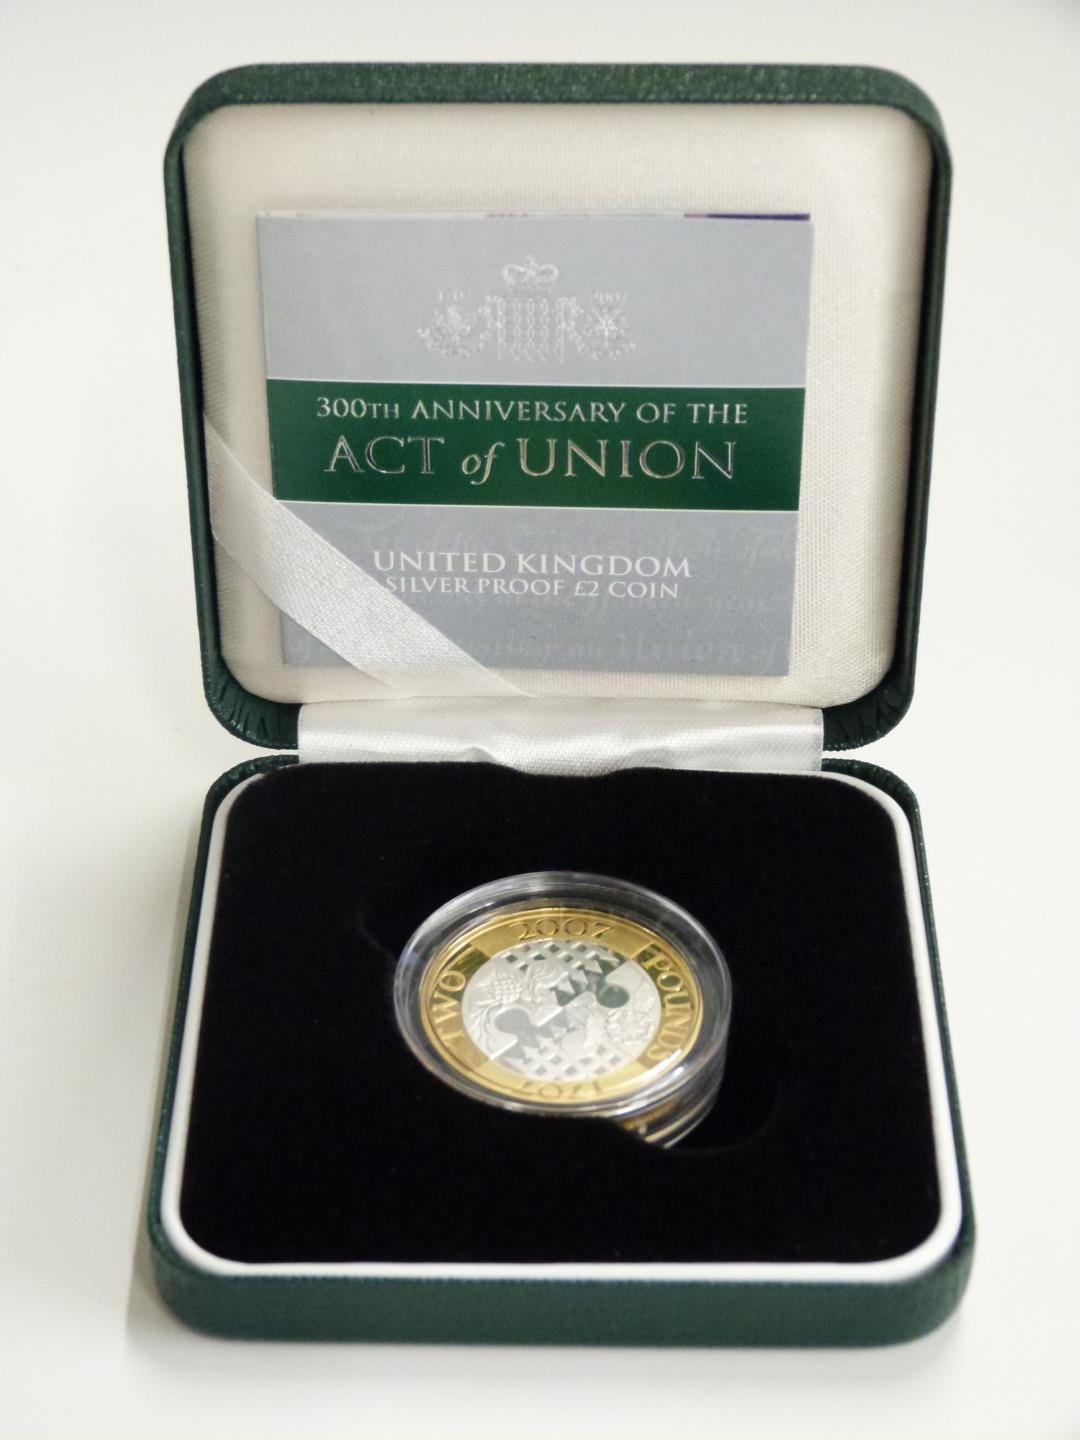 Four Royal Mint silver proof £2 coins for 2007, two Acts of Union and two slavery examples, all - Image 4 of 5